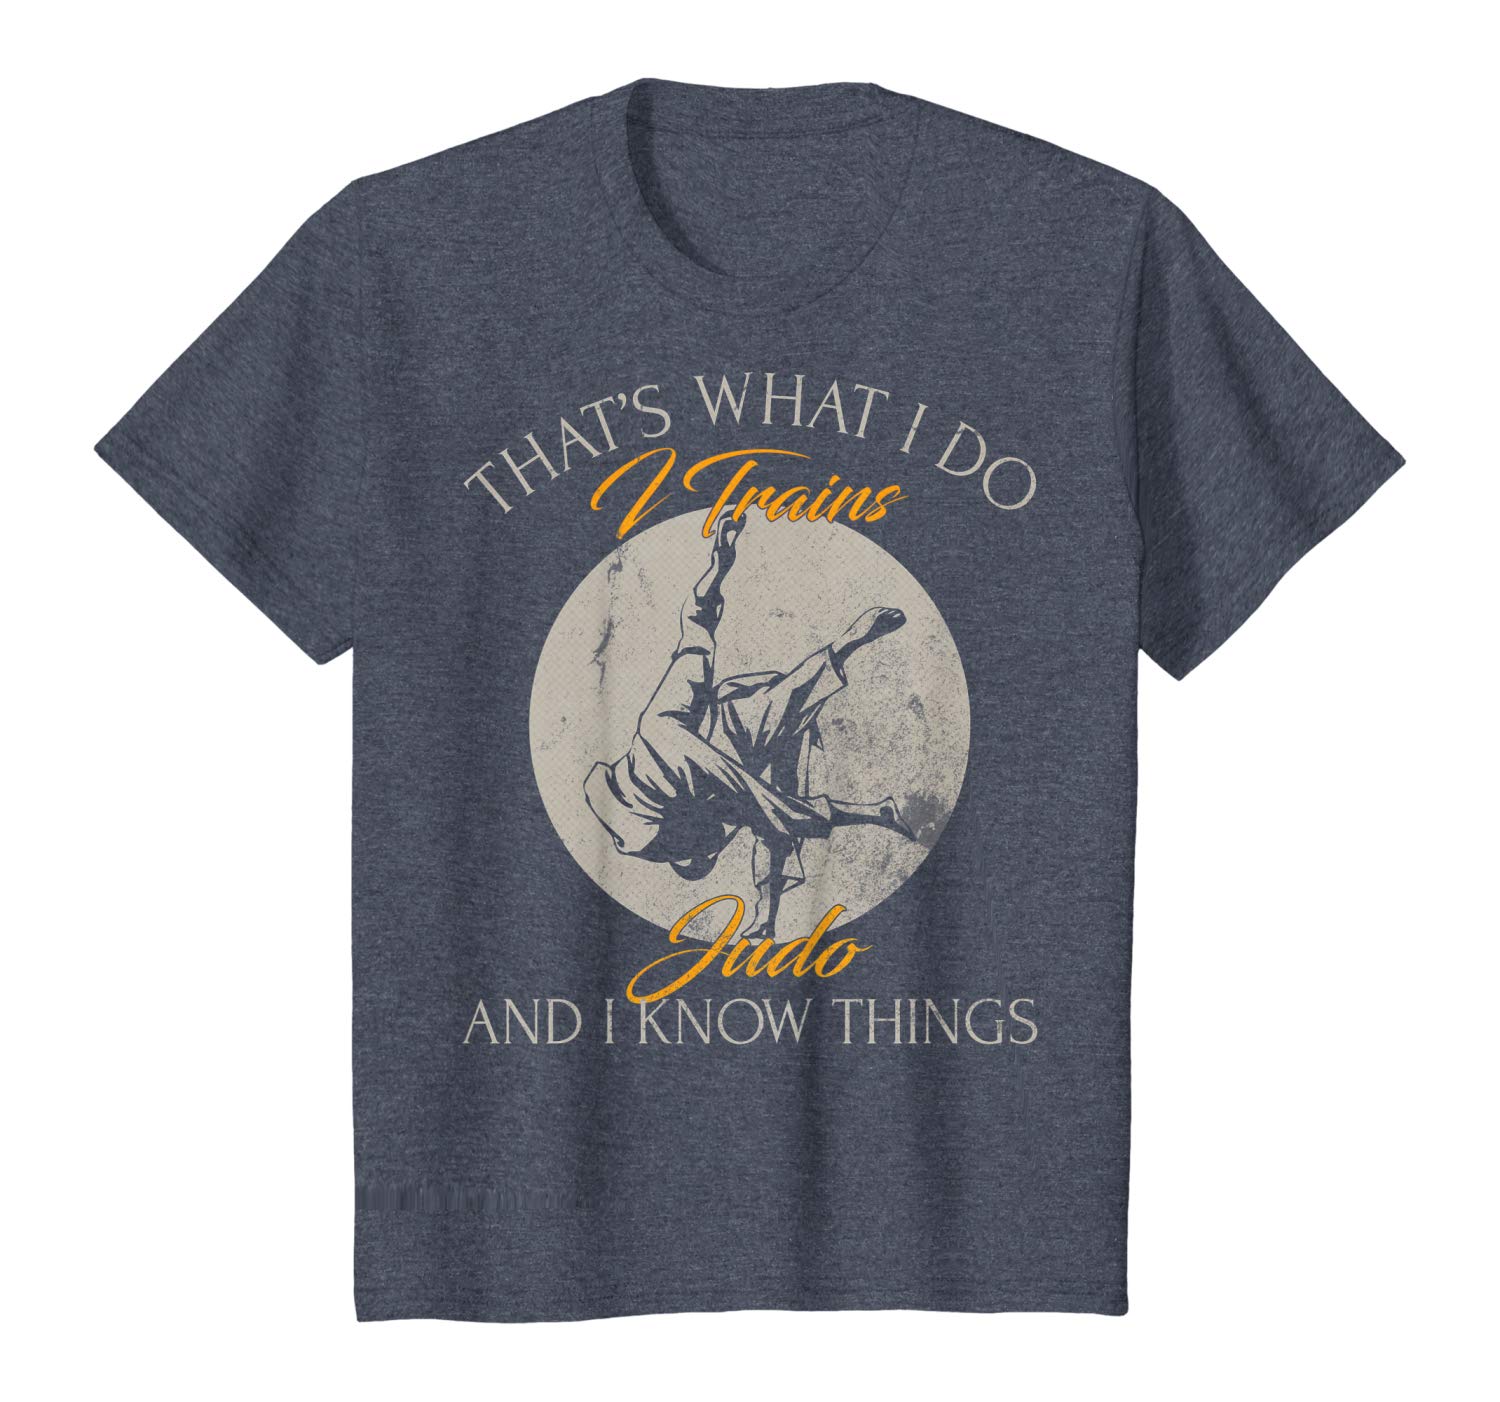 Awesome That’s What I Do, I Trains Judo And I Know Things Funny Gift T-Shirt T-Shirt Sweatshirt Hoodie